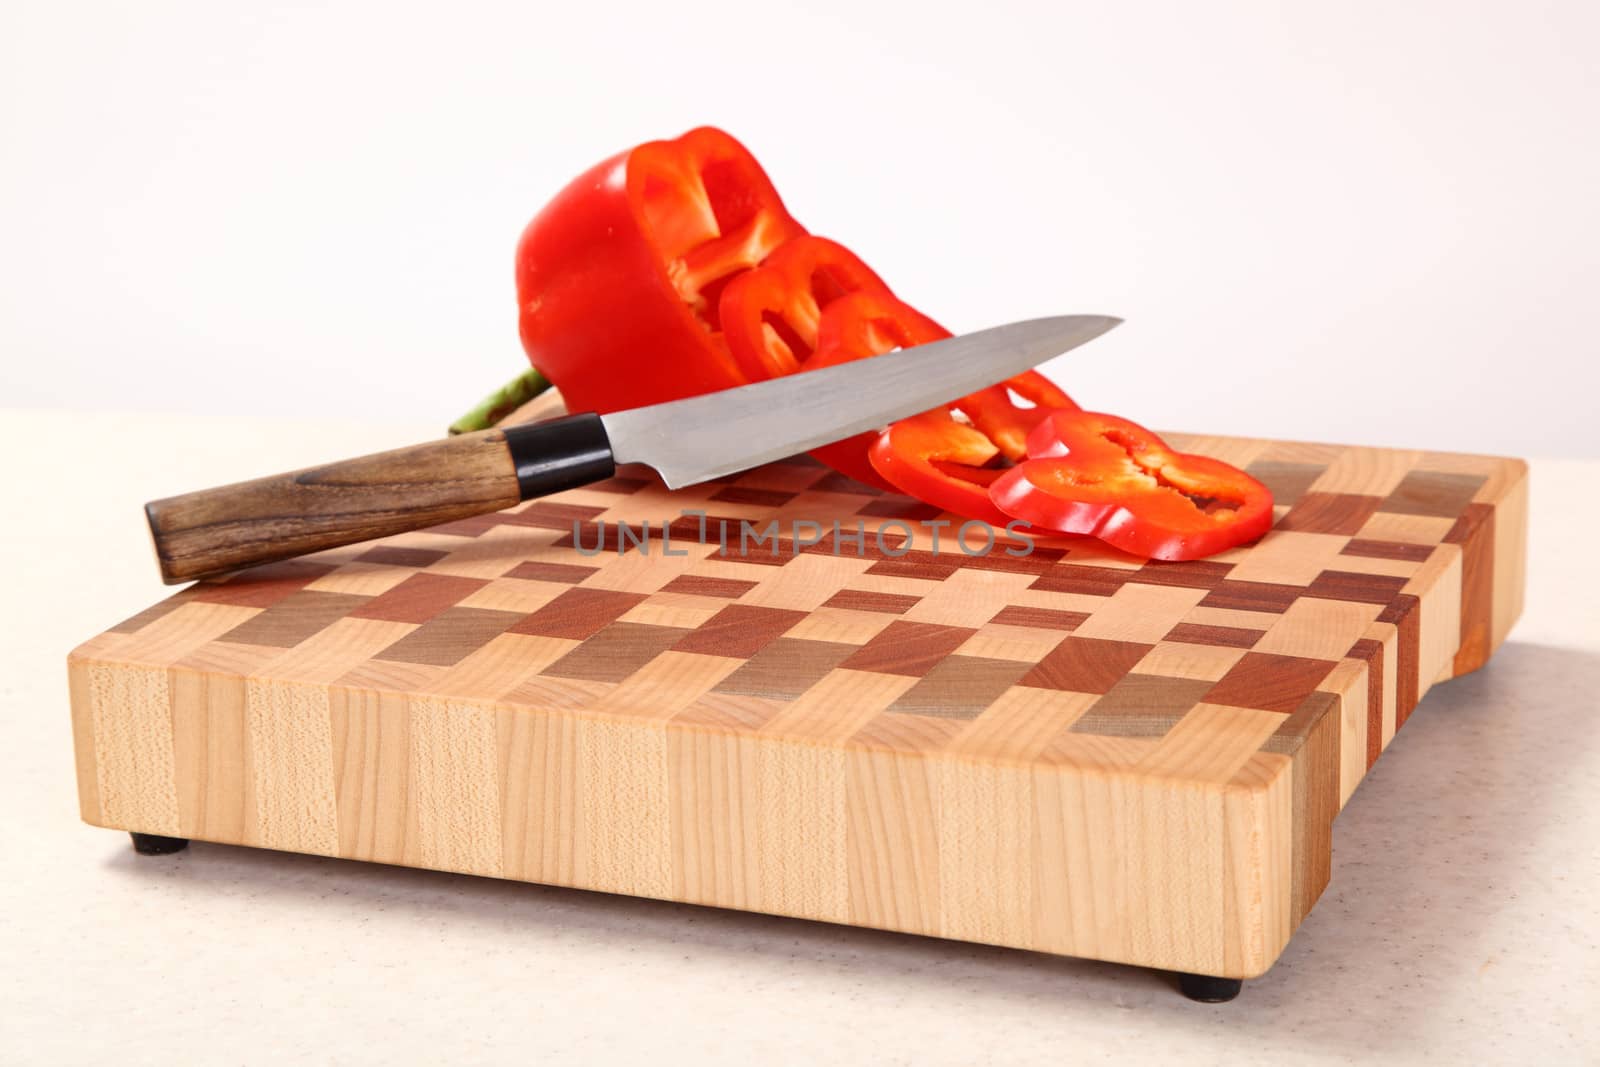 red pepper knifed on a chopping board